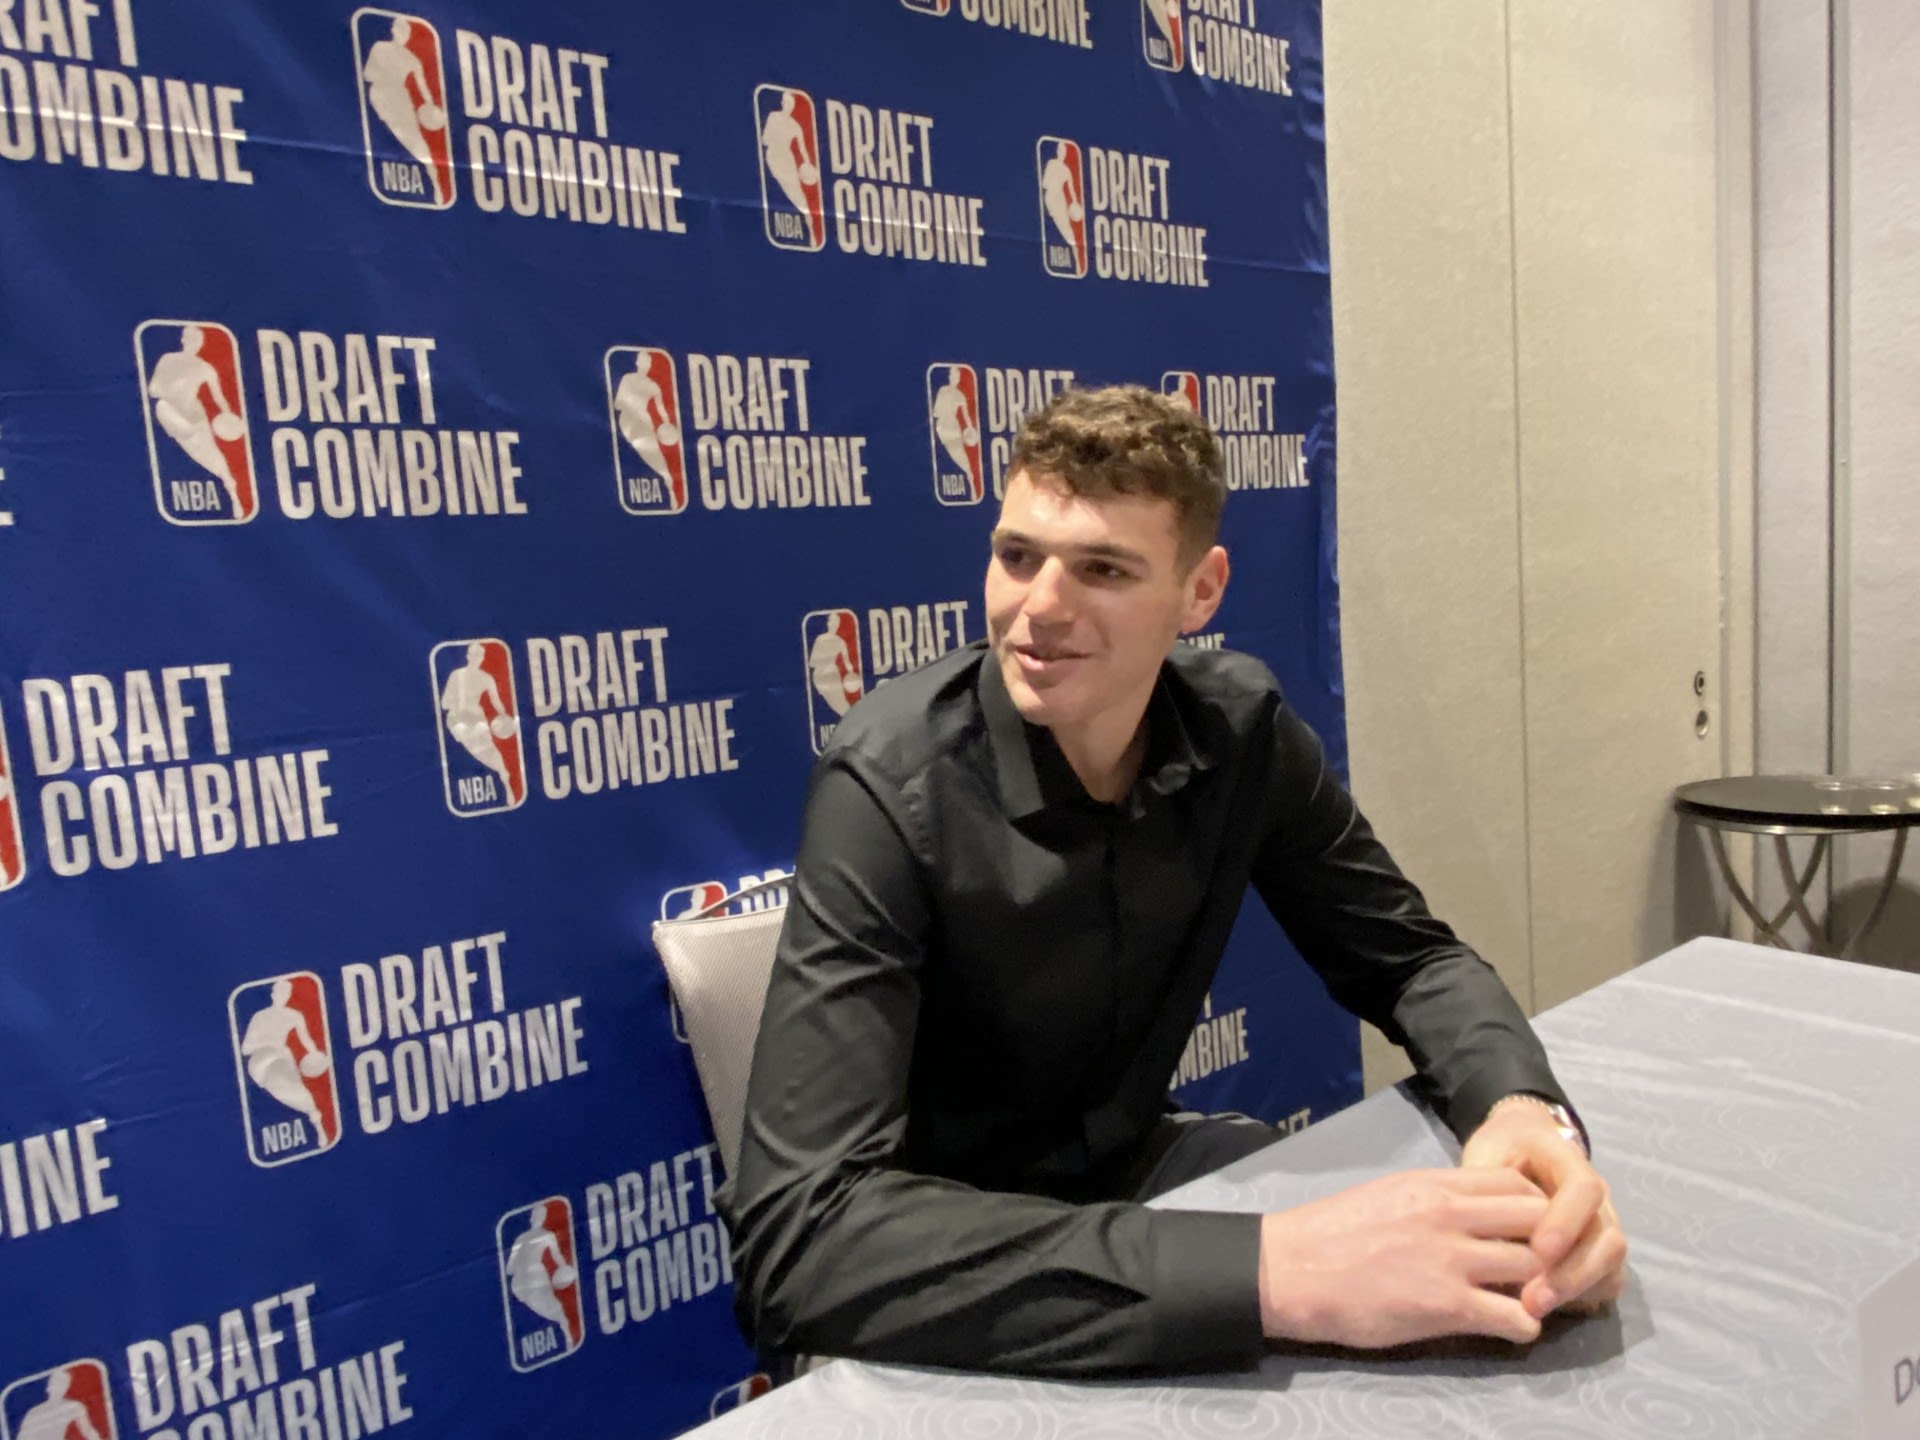 Donovan Clingan won 63 games and 2 titles in 2 years at UConn. Here’s why the NBA will be different.